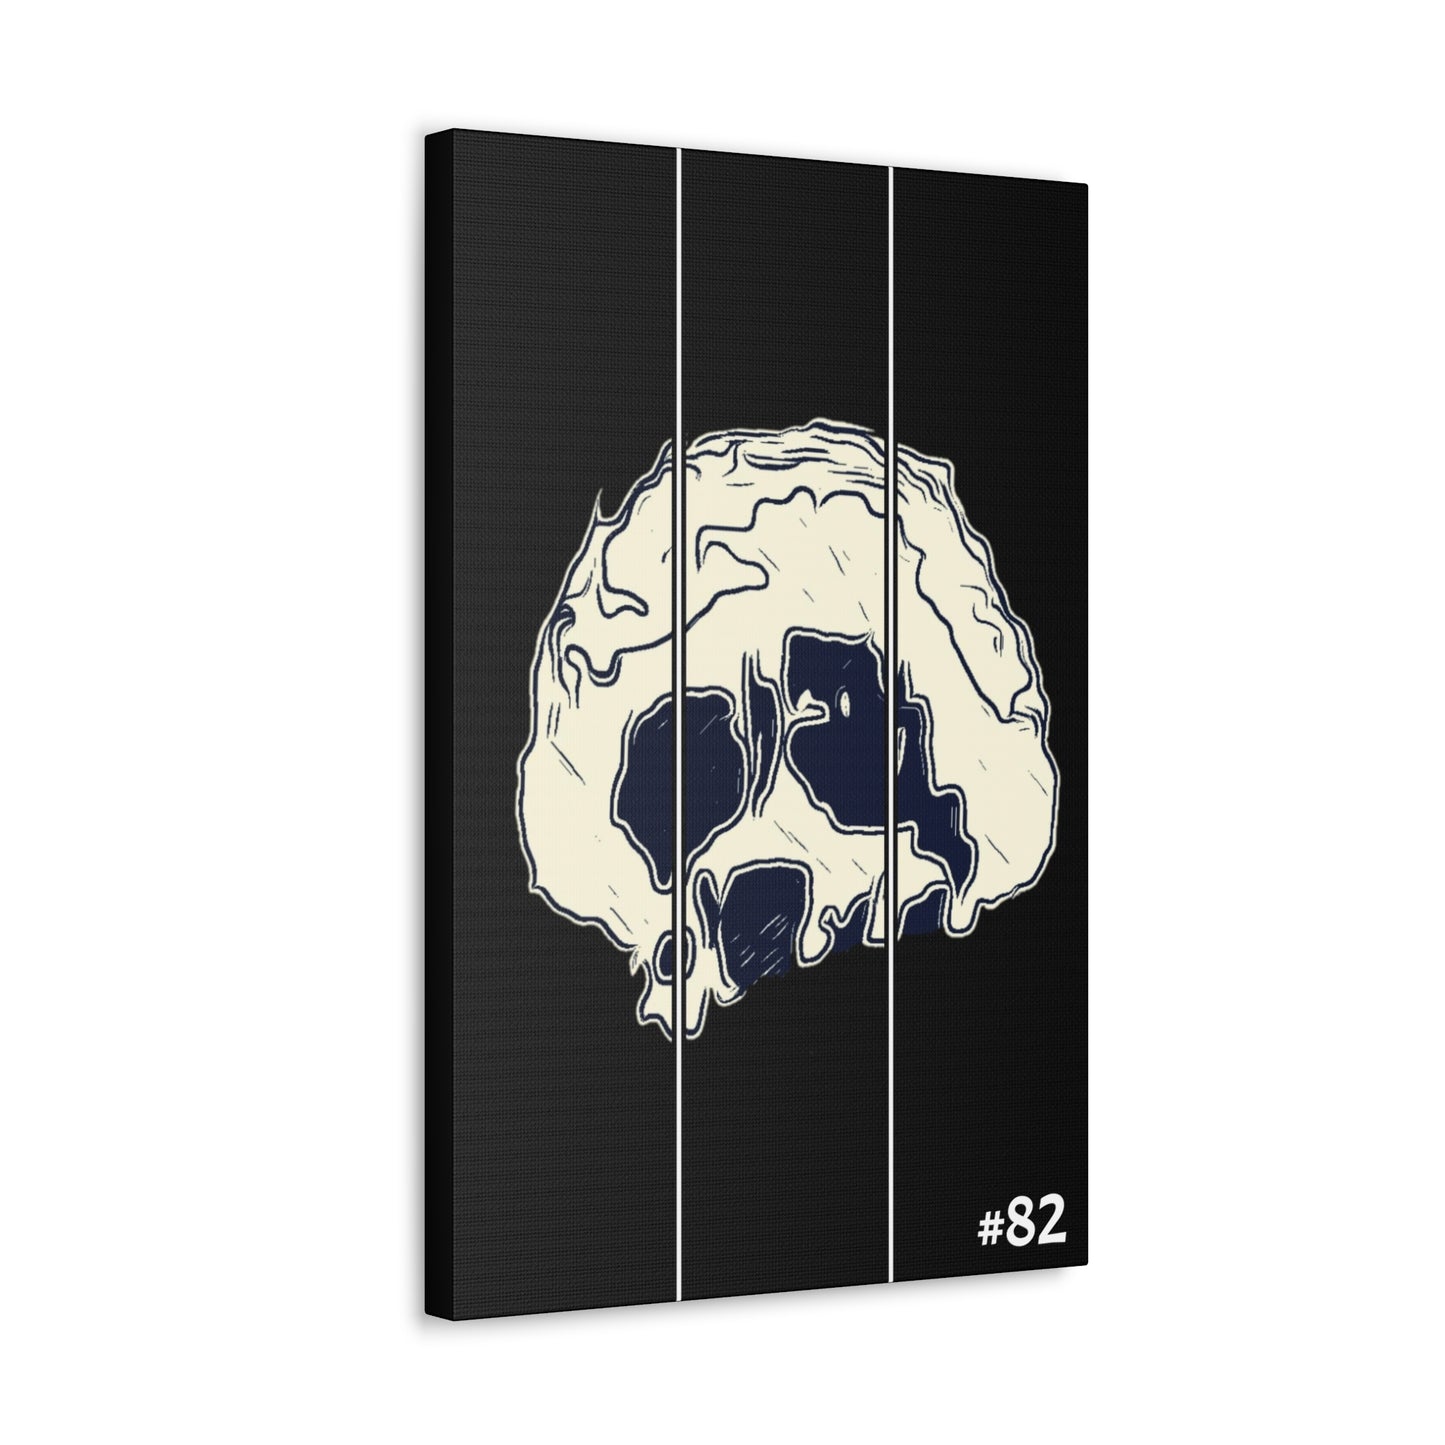 #82 - Made with Miracles Minature Collectable Tall Canvas Wall Art, 3 sizes available - 2015 Skull Faced Asteroid